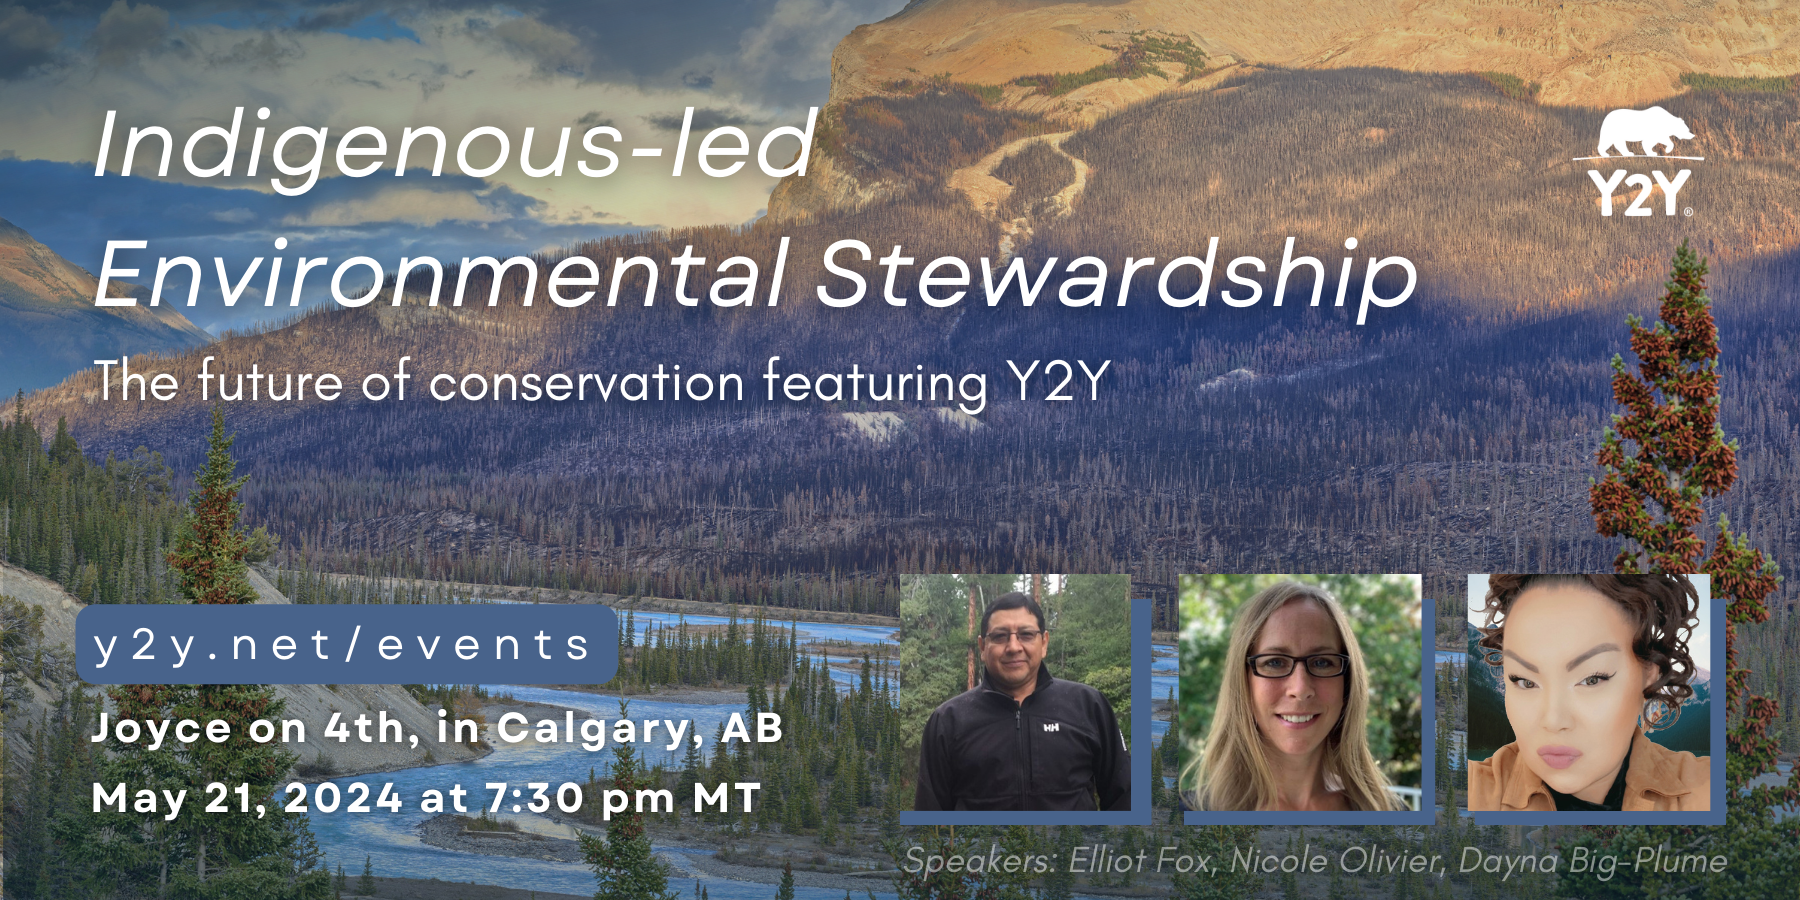 A river and mountain landscape image with the event information about Indigenous-led Environmental Stewardship happening on May 21 in Calgary, Alberta